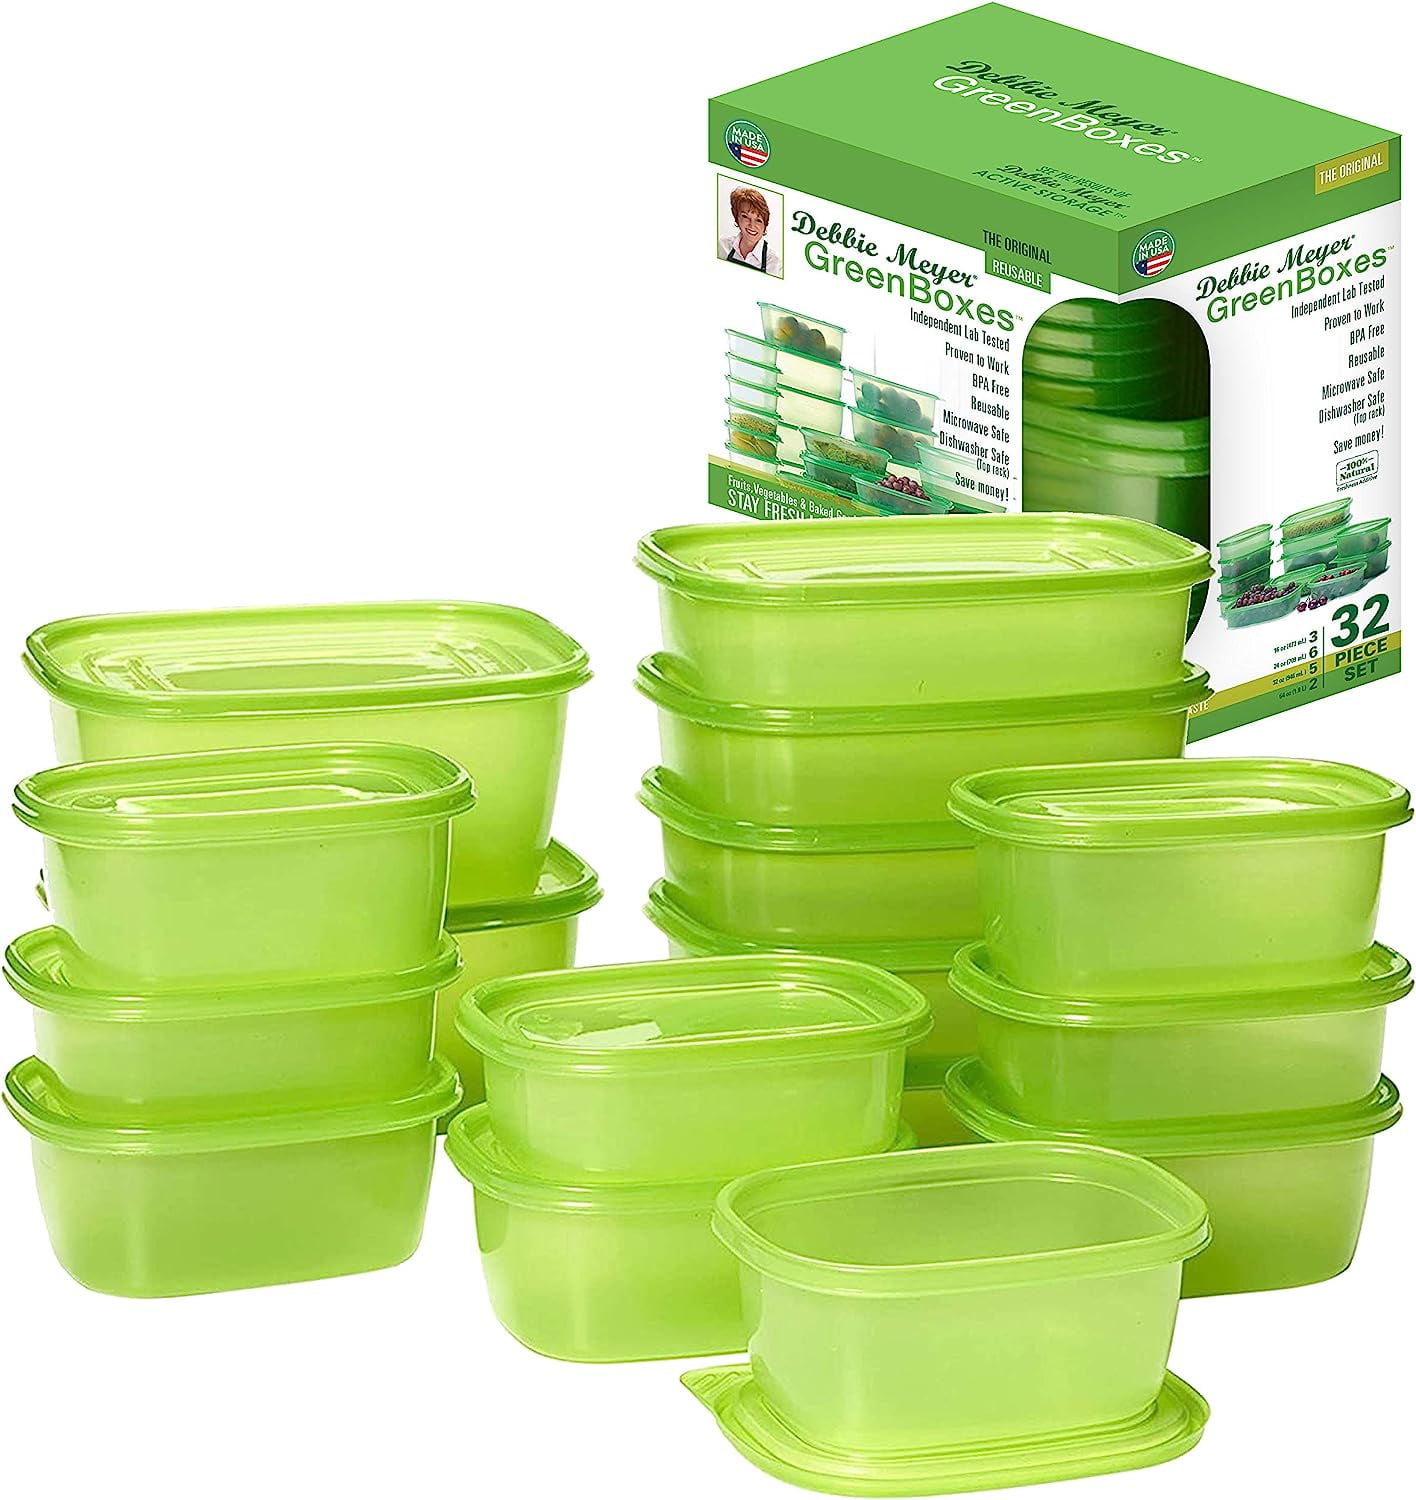 Are reusable food containers as good for the environment as we